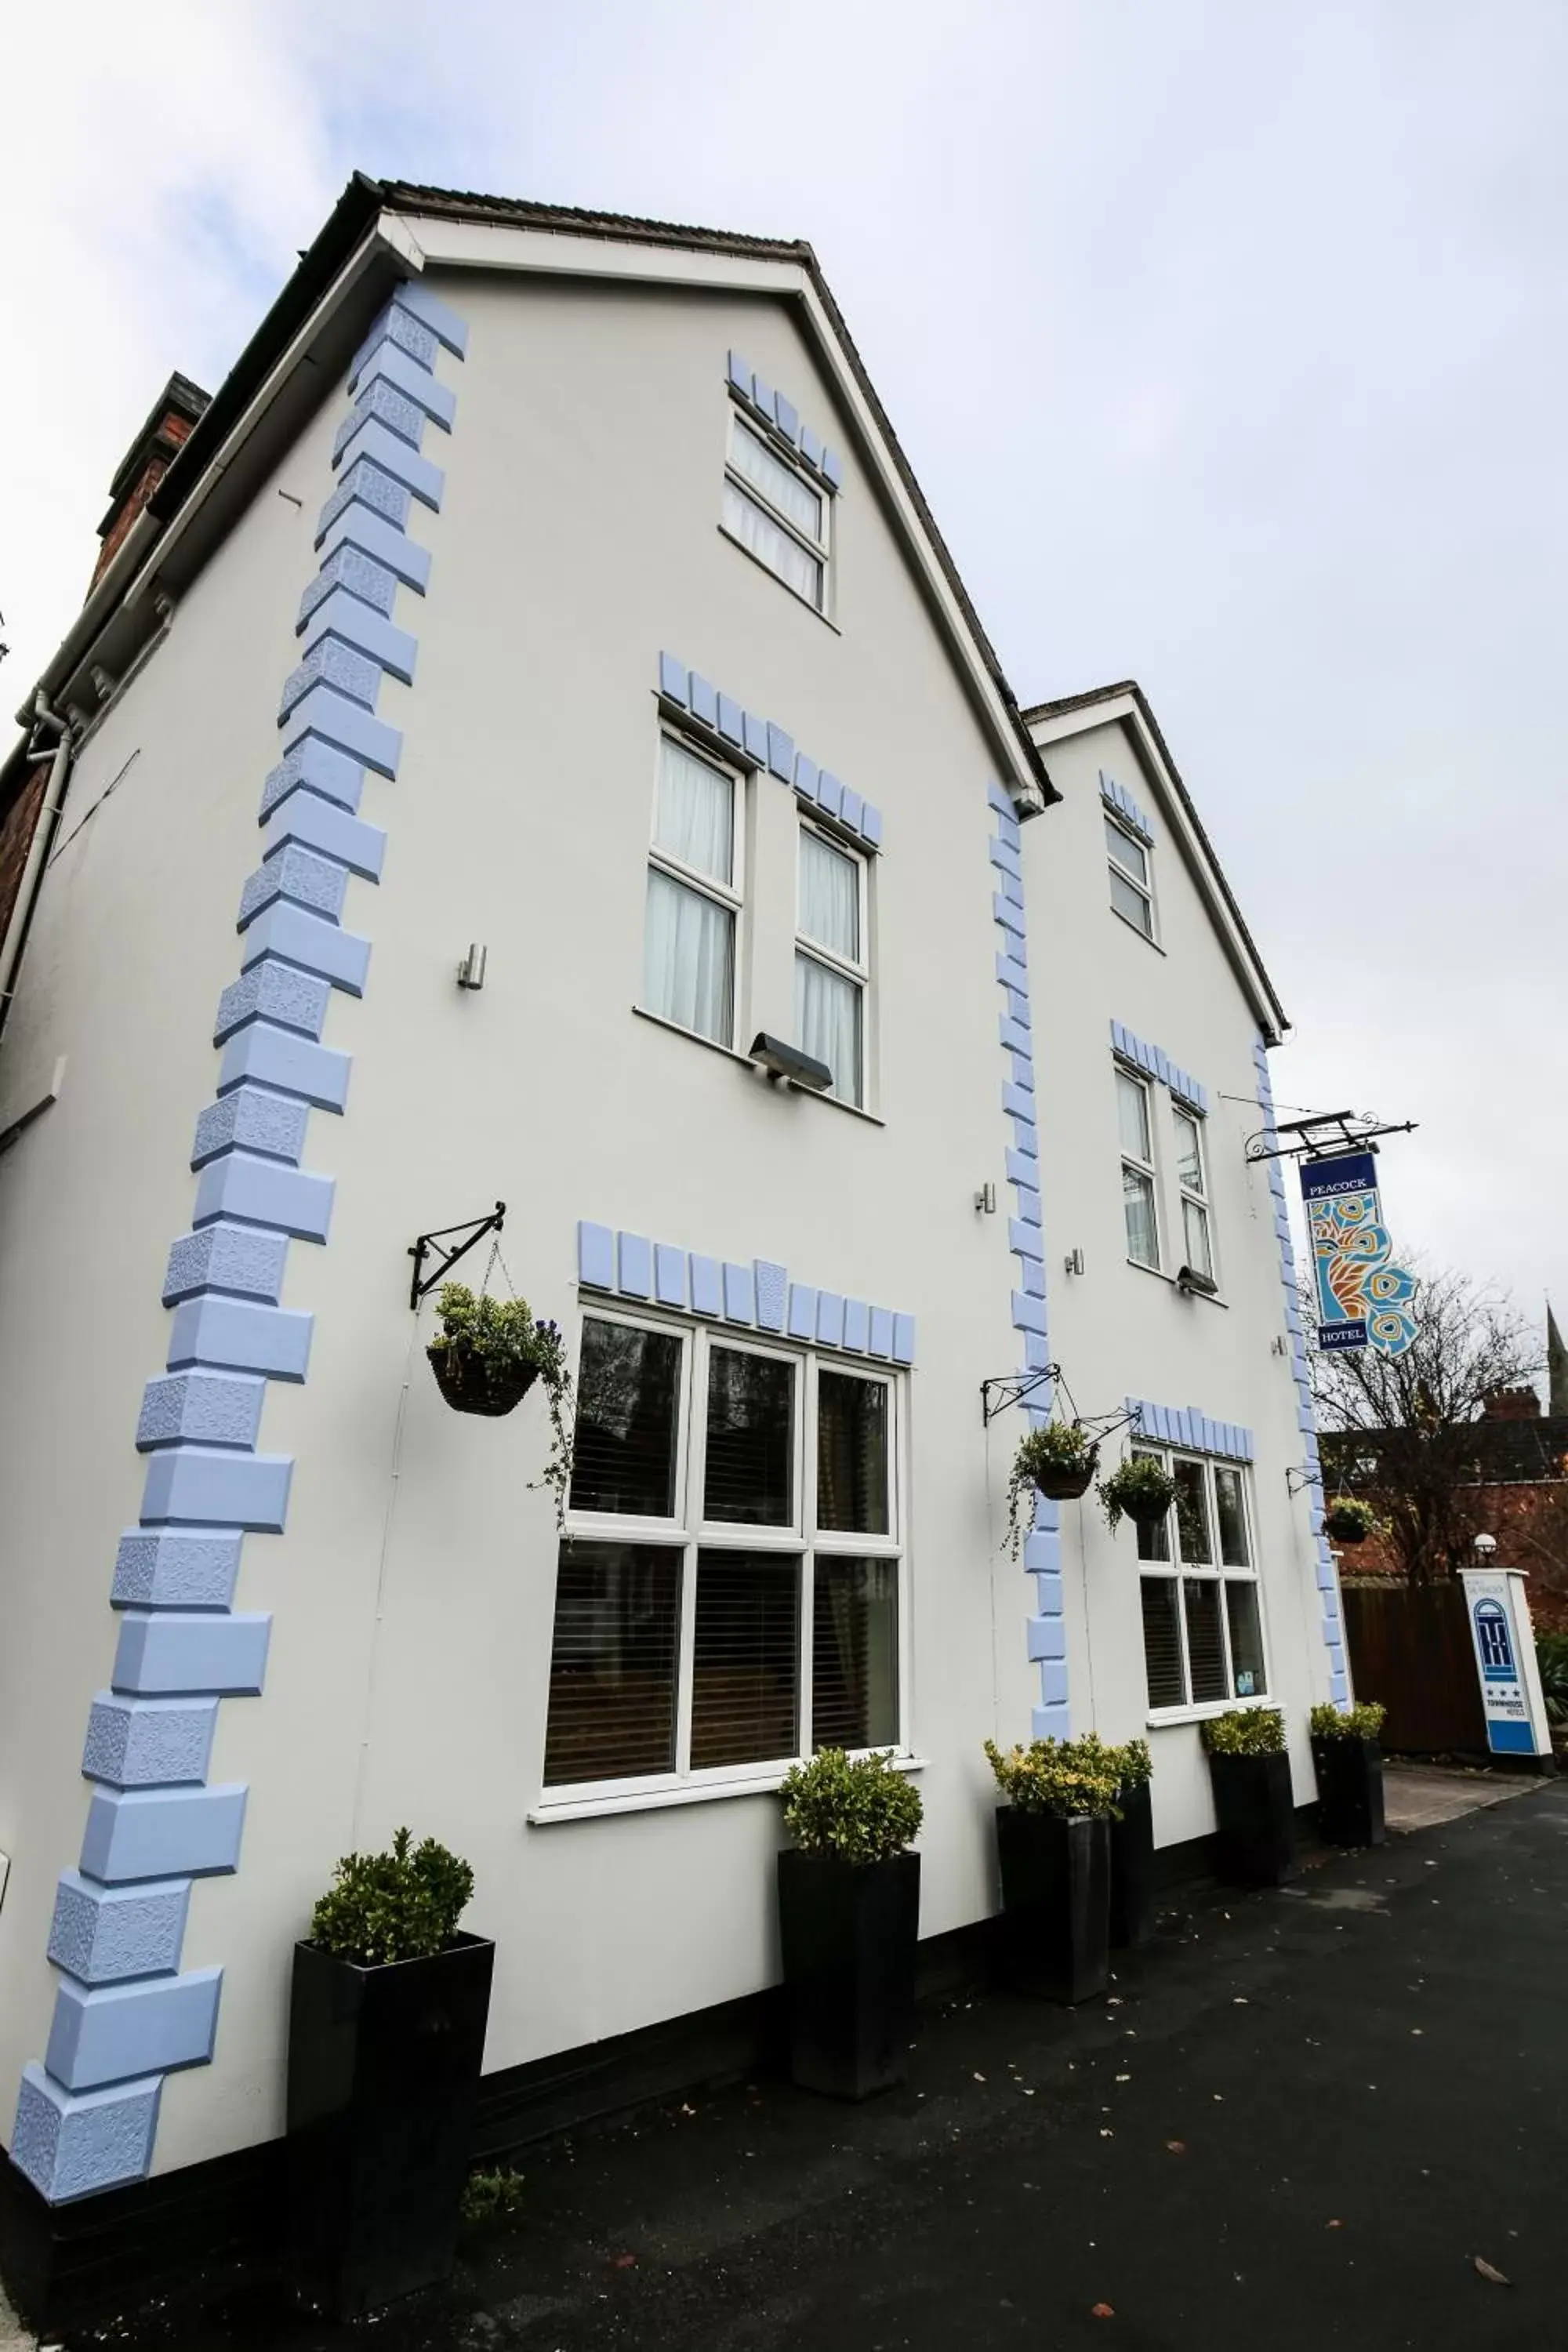 Property Building in The Peacock Townhouse Hotel Kenilworth - Warwick